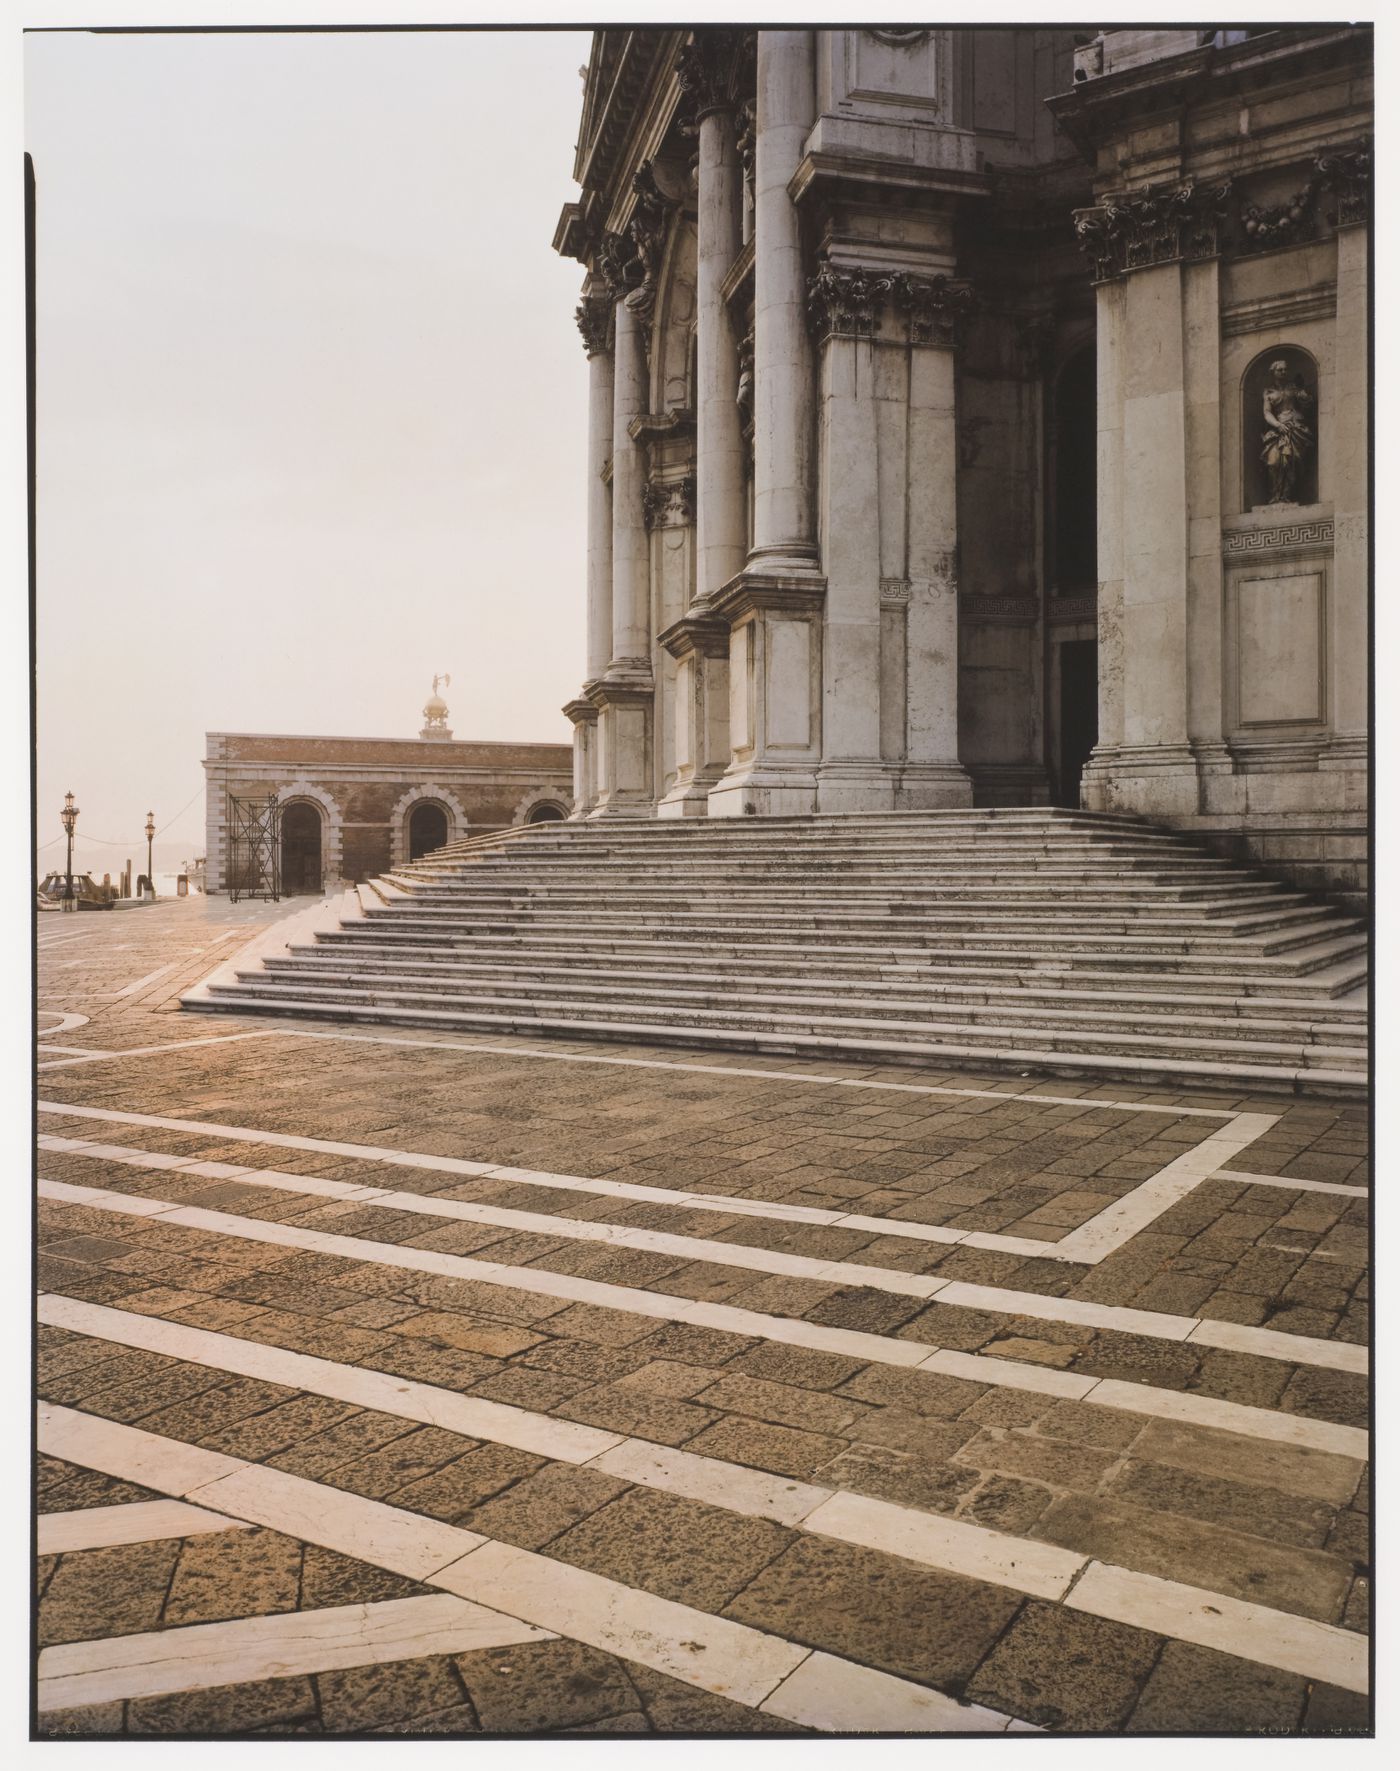 Partial view of the steps and façade of the church of Santa Maria della Salute, Venice, Italy